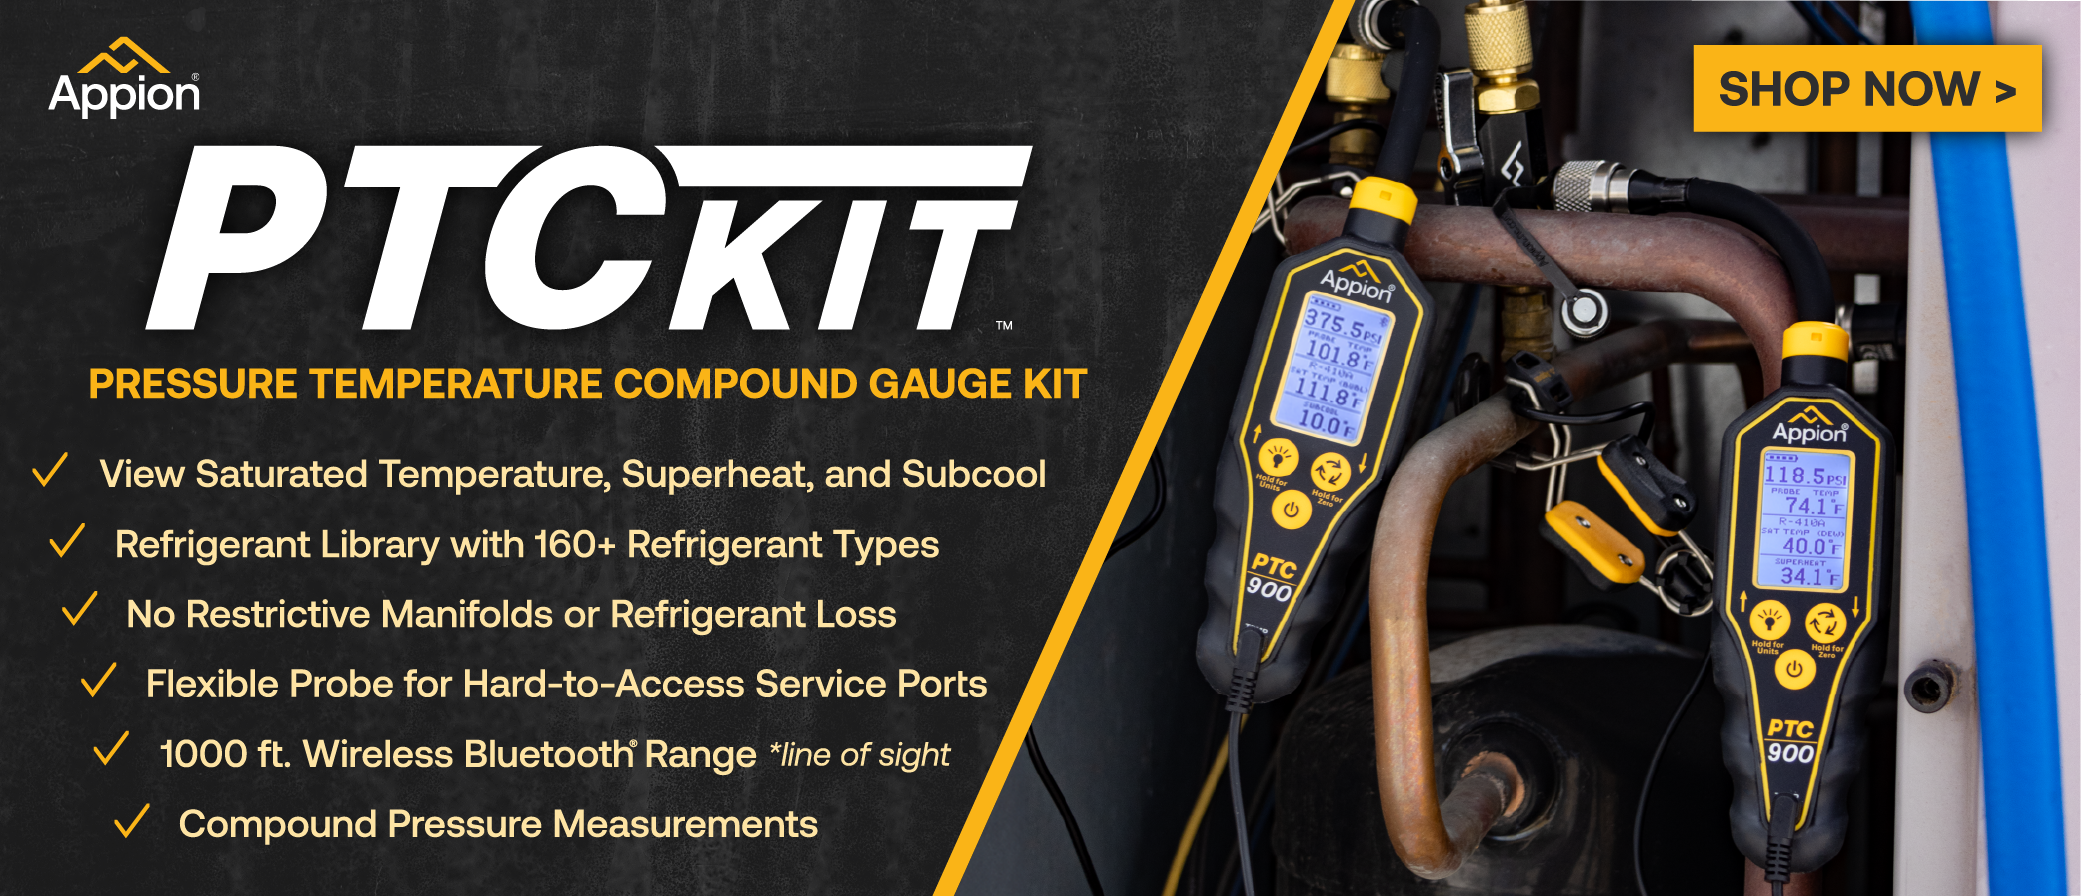 Appion PTCKIT Pressure Temperature Compound Gage Kit has all these great features! Shop now and learn more here